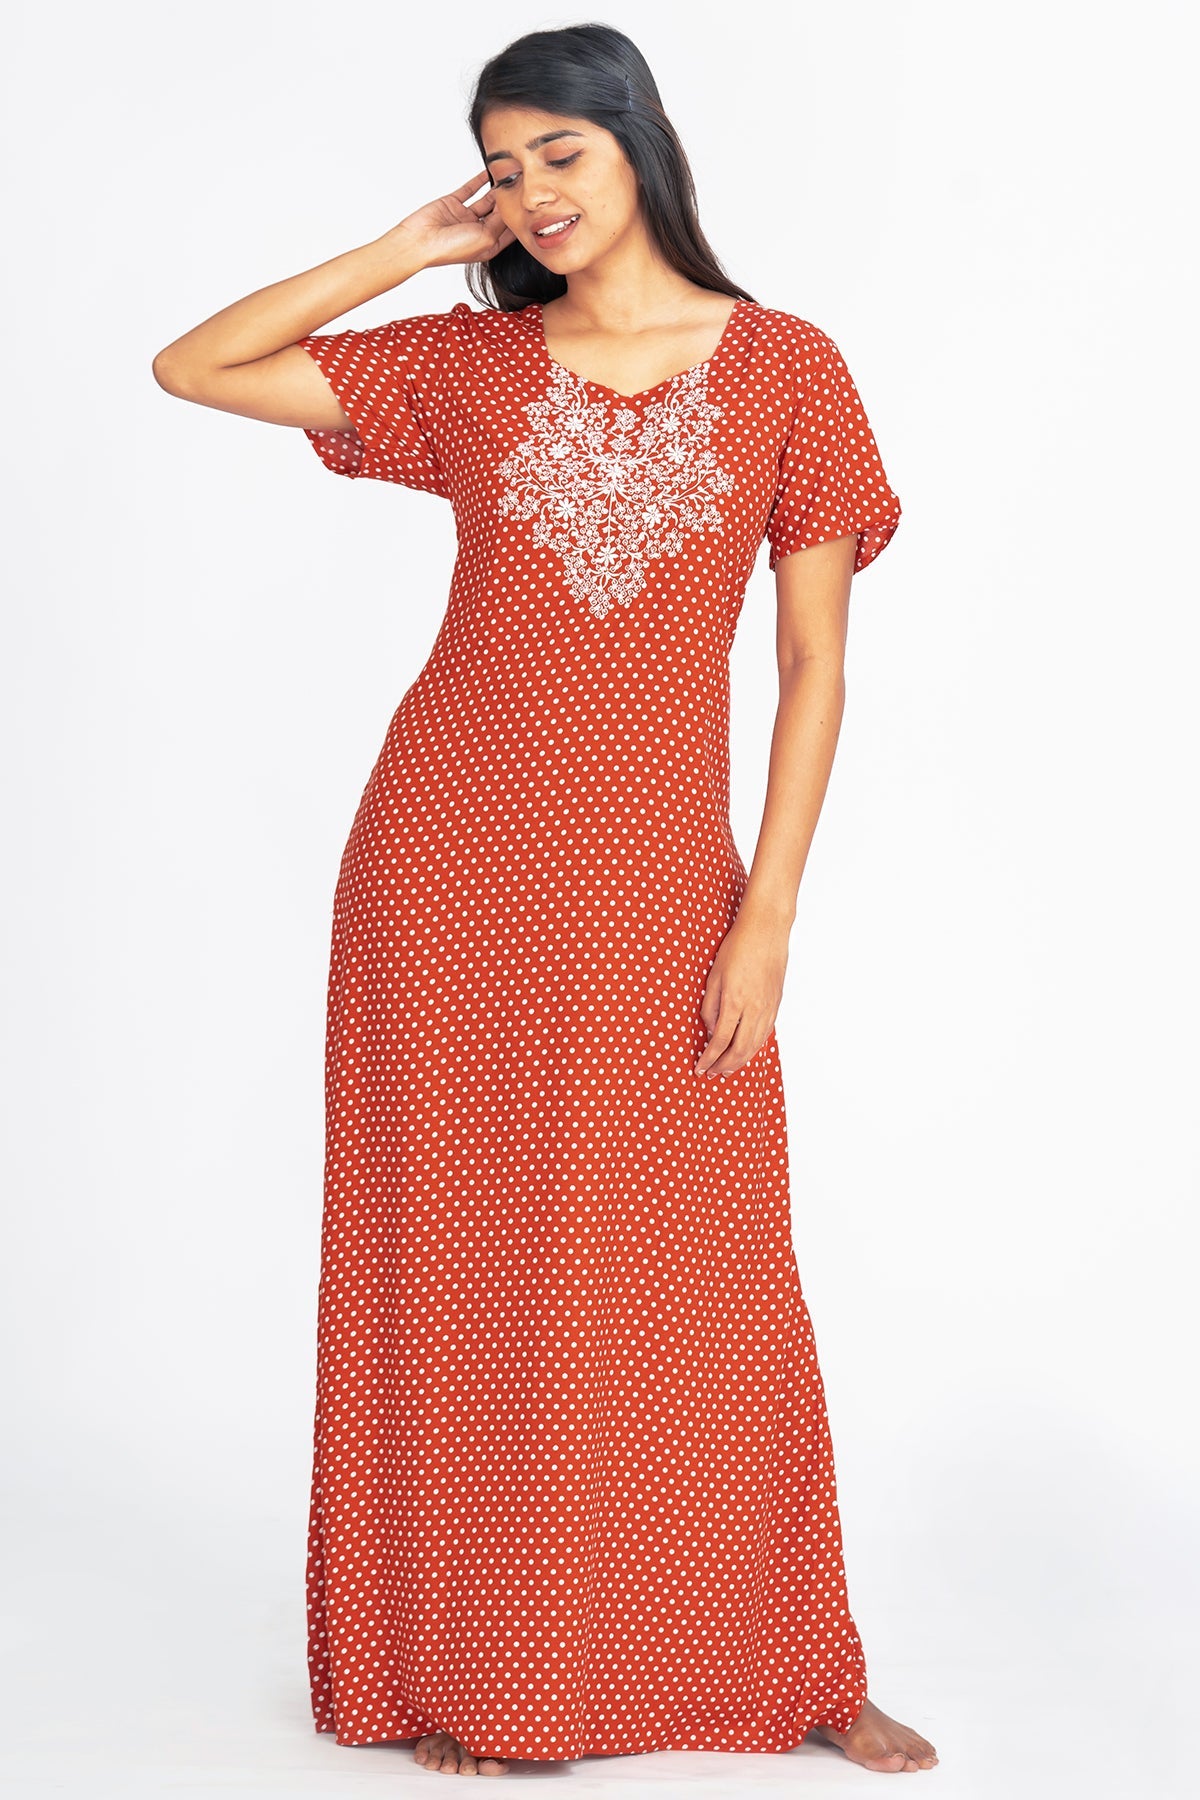 All Over Polka Dot Print With Contrast Floral Embroidered Yoke Nighty Red